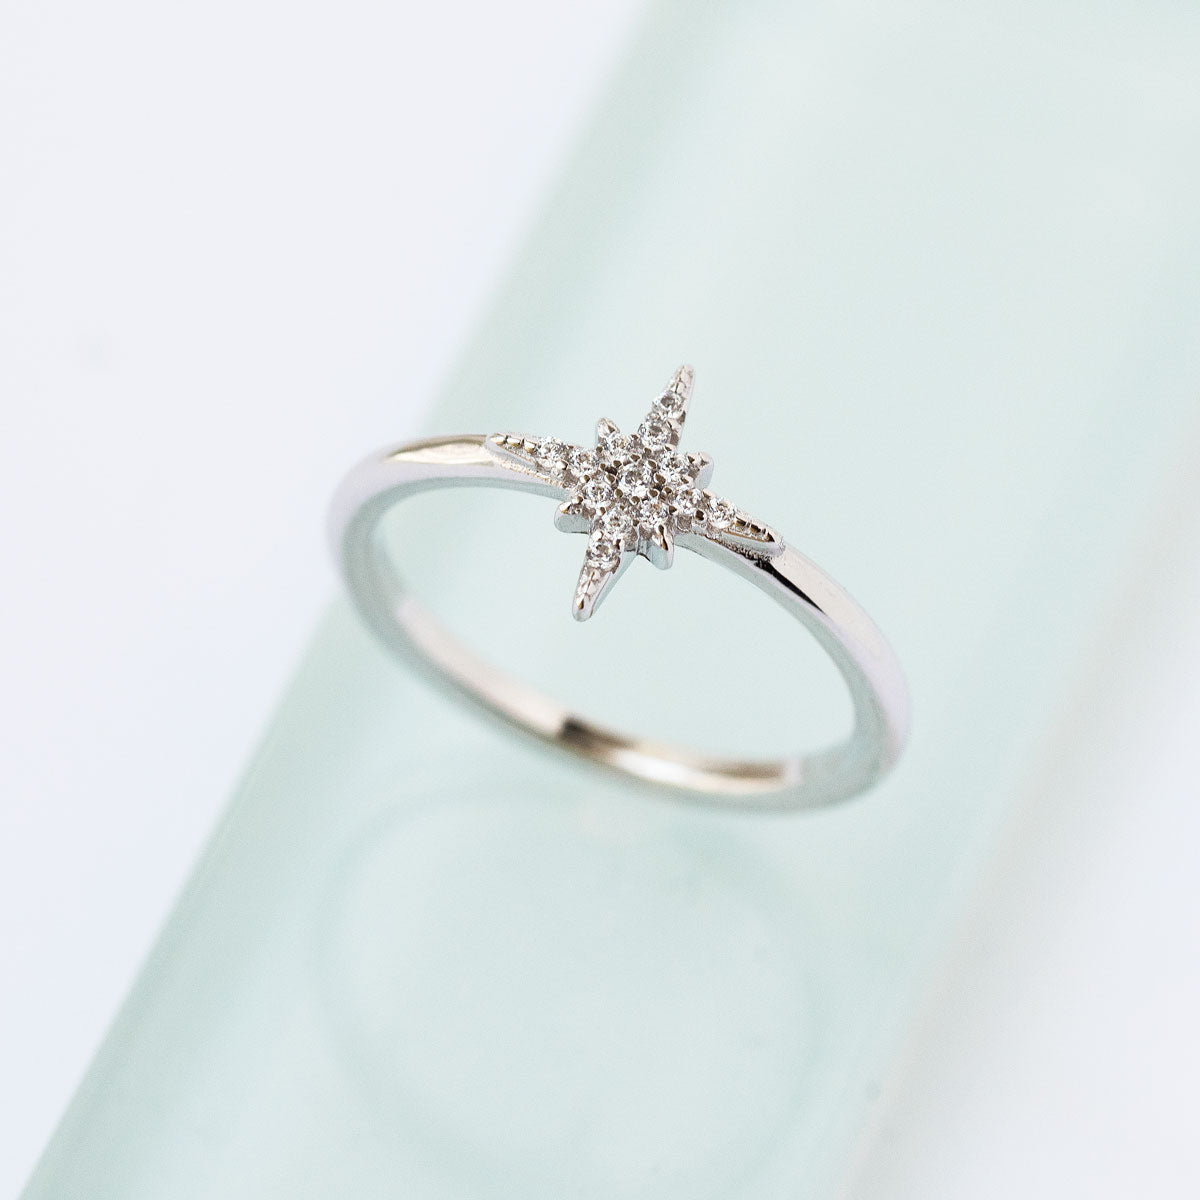 Sterling Silver Star Ring set with Pave Cubic Zirconia Stones